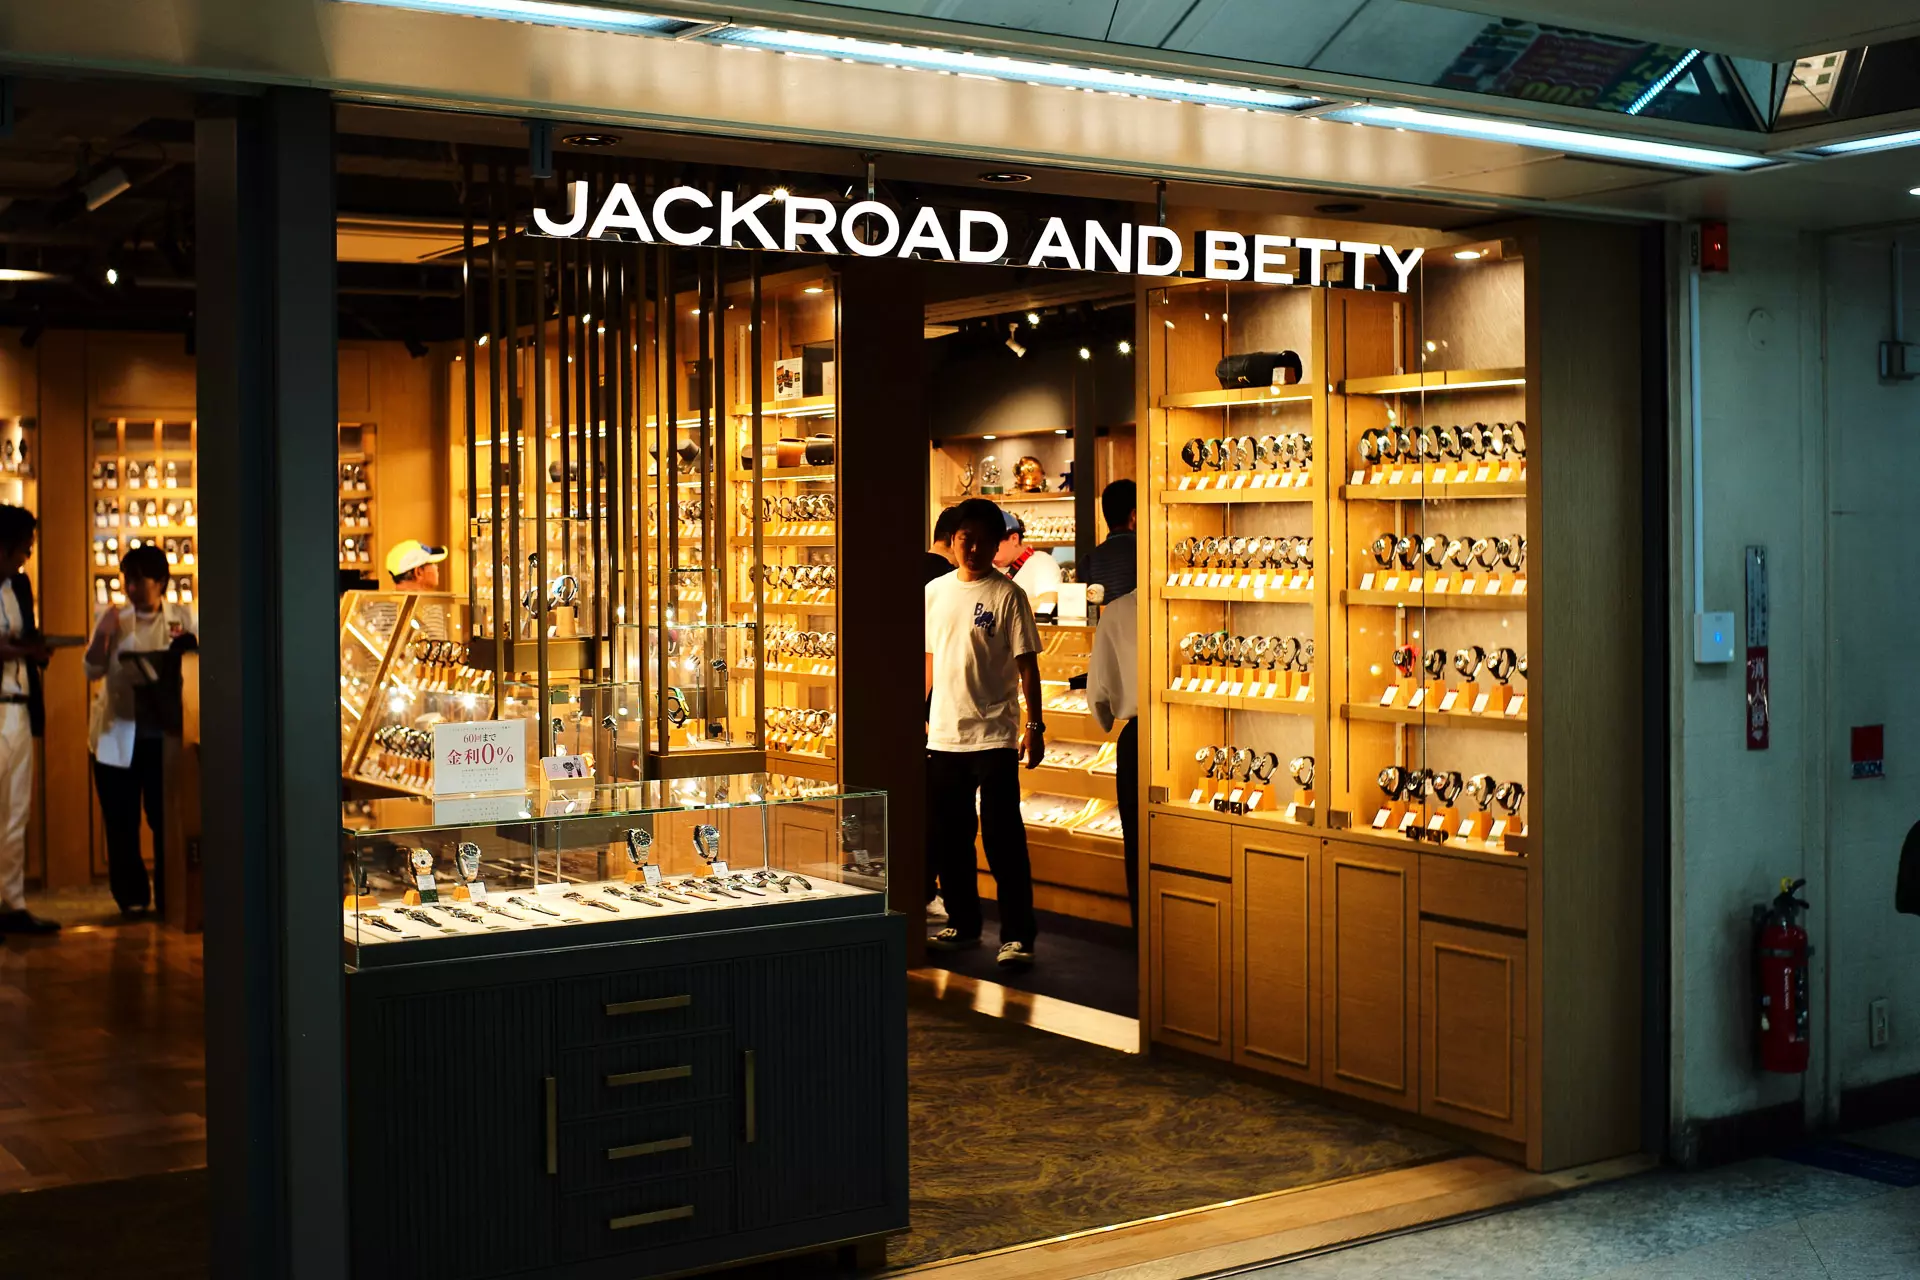 JACKROAD AND BETTY